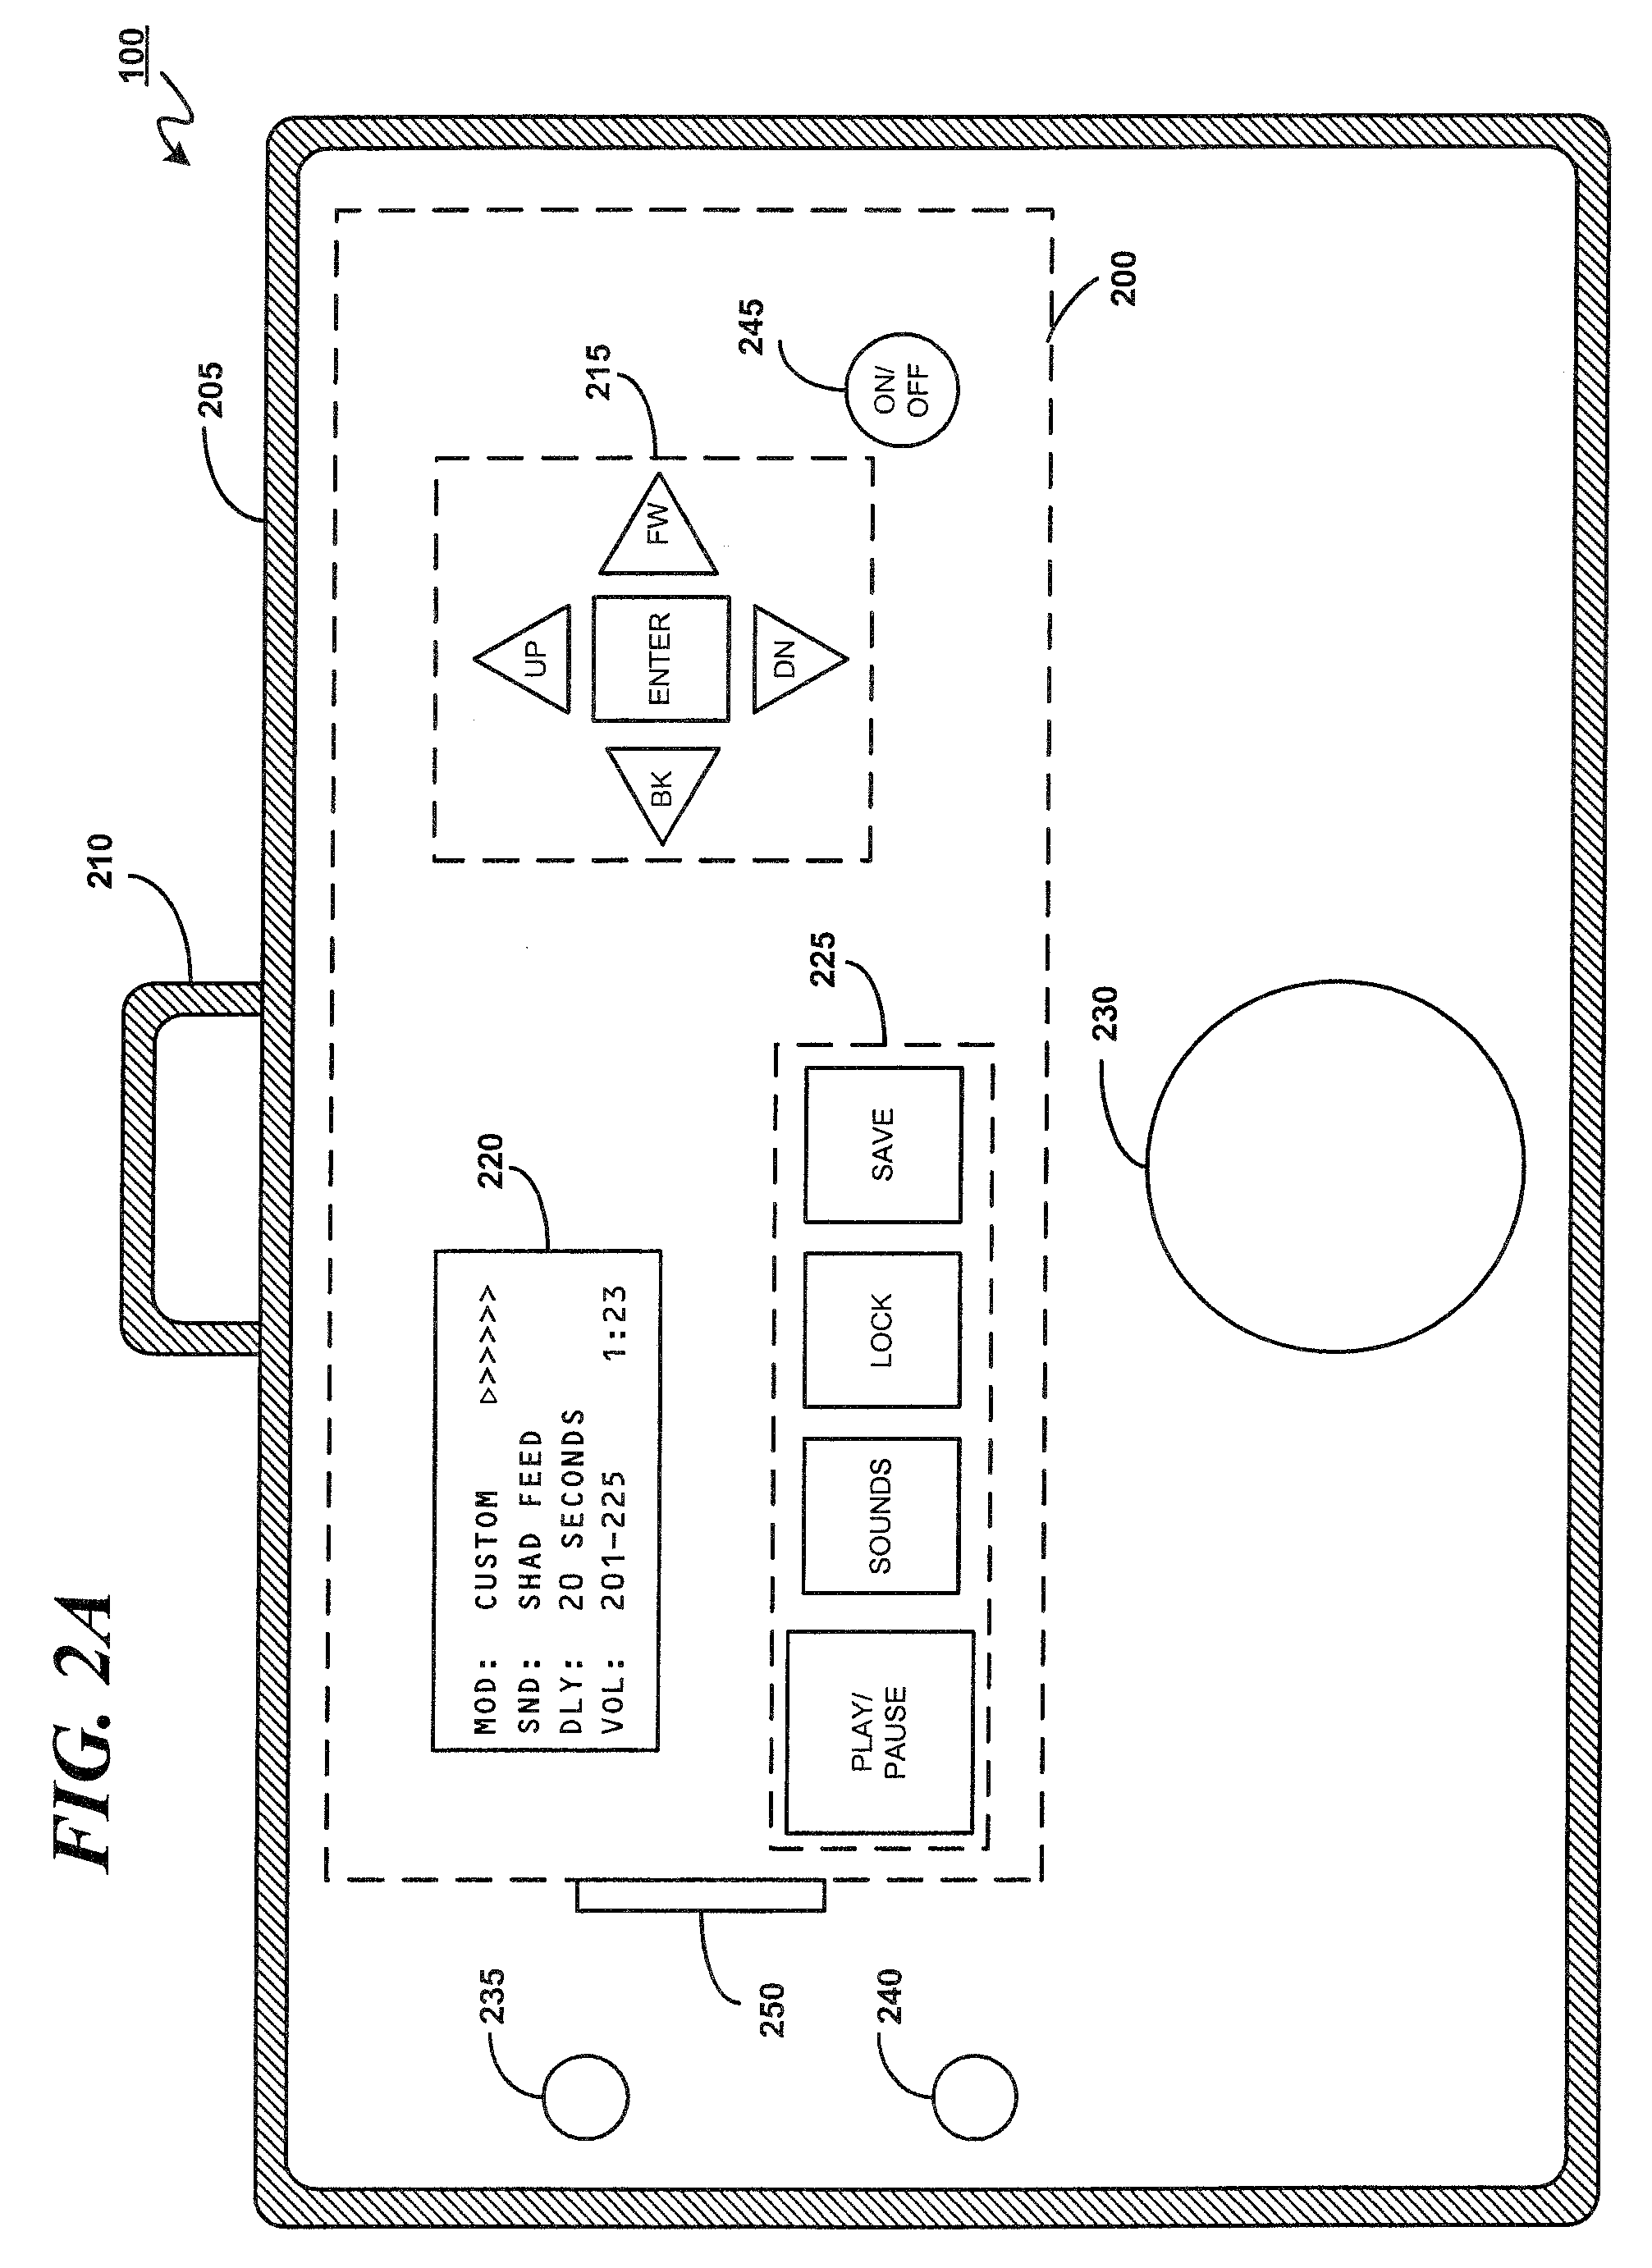 System, method and apparatus for attracting and stimulating aquatic animals